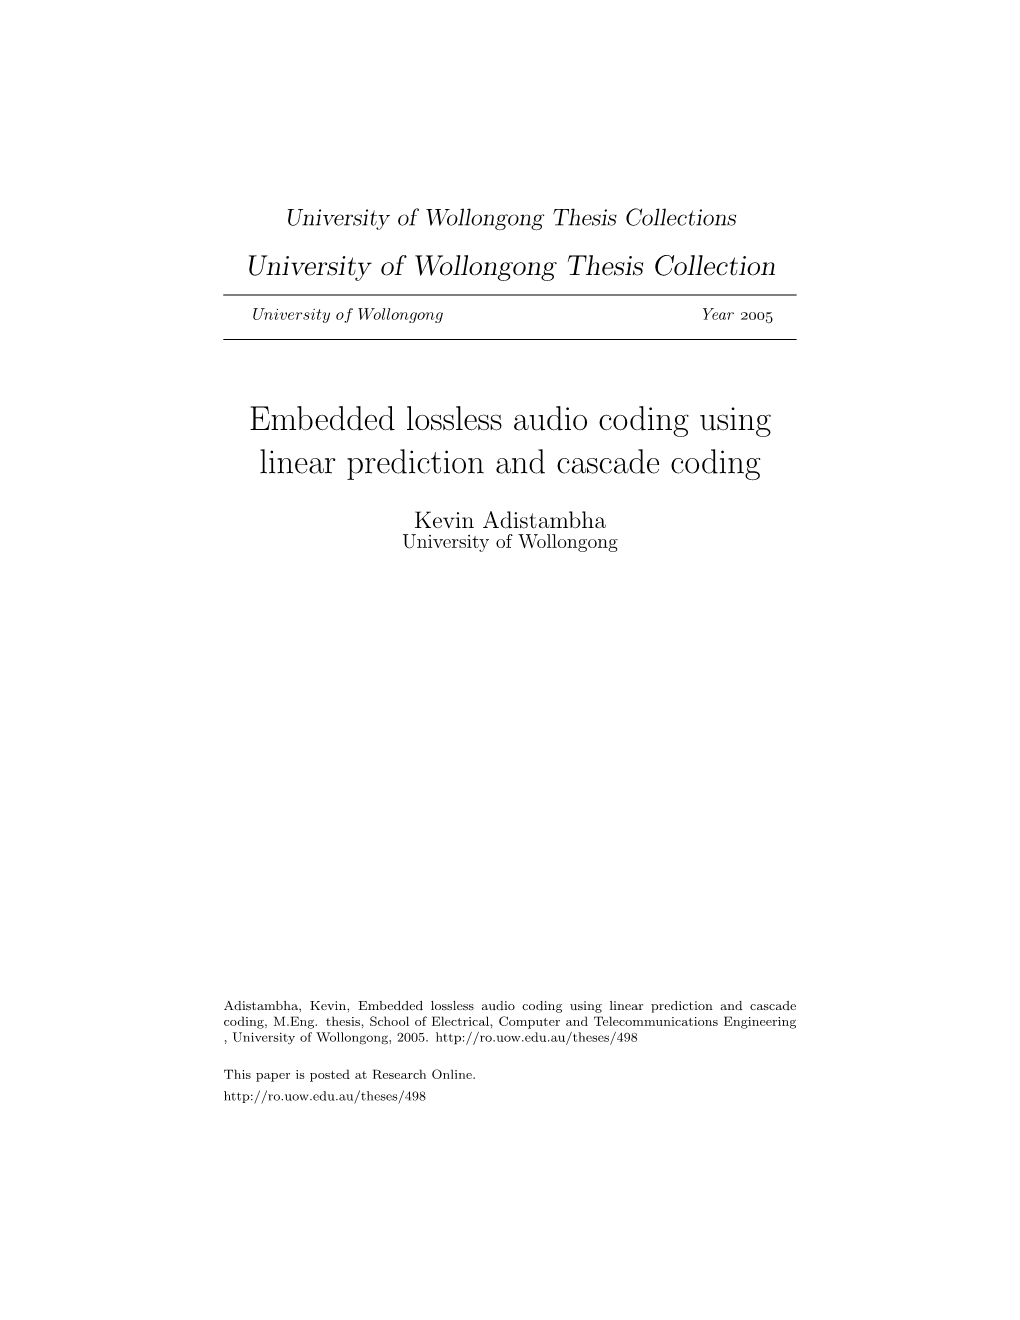 Embedded Lossless Audio Coding Using Linear Prediction and Cascade Coding